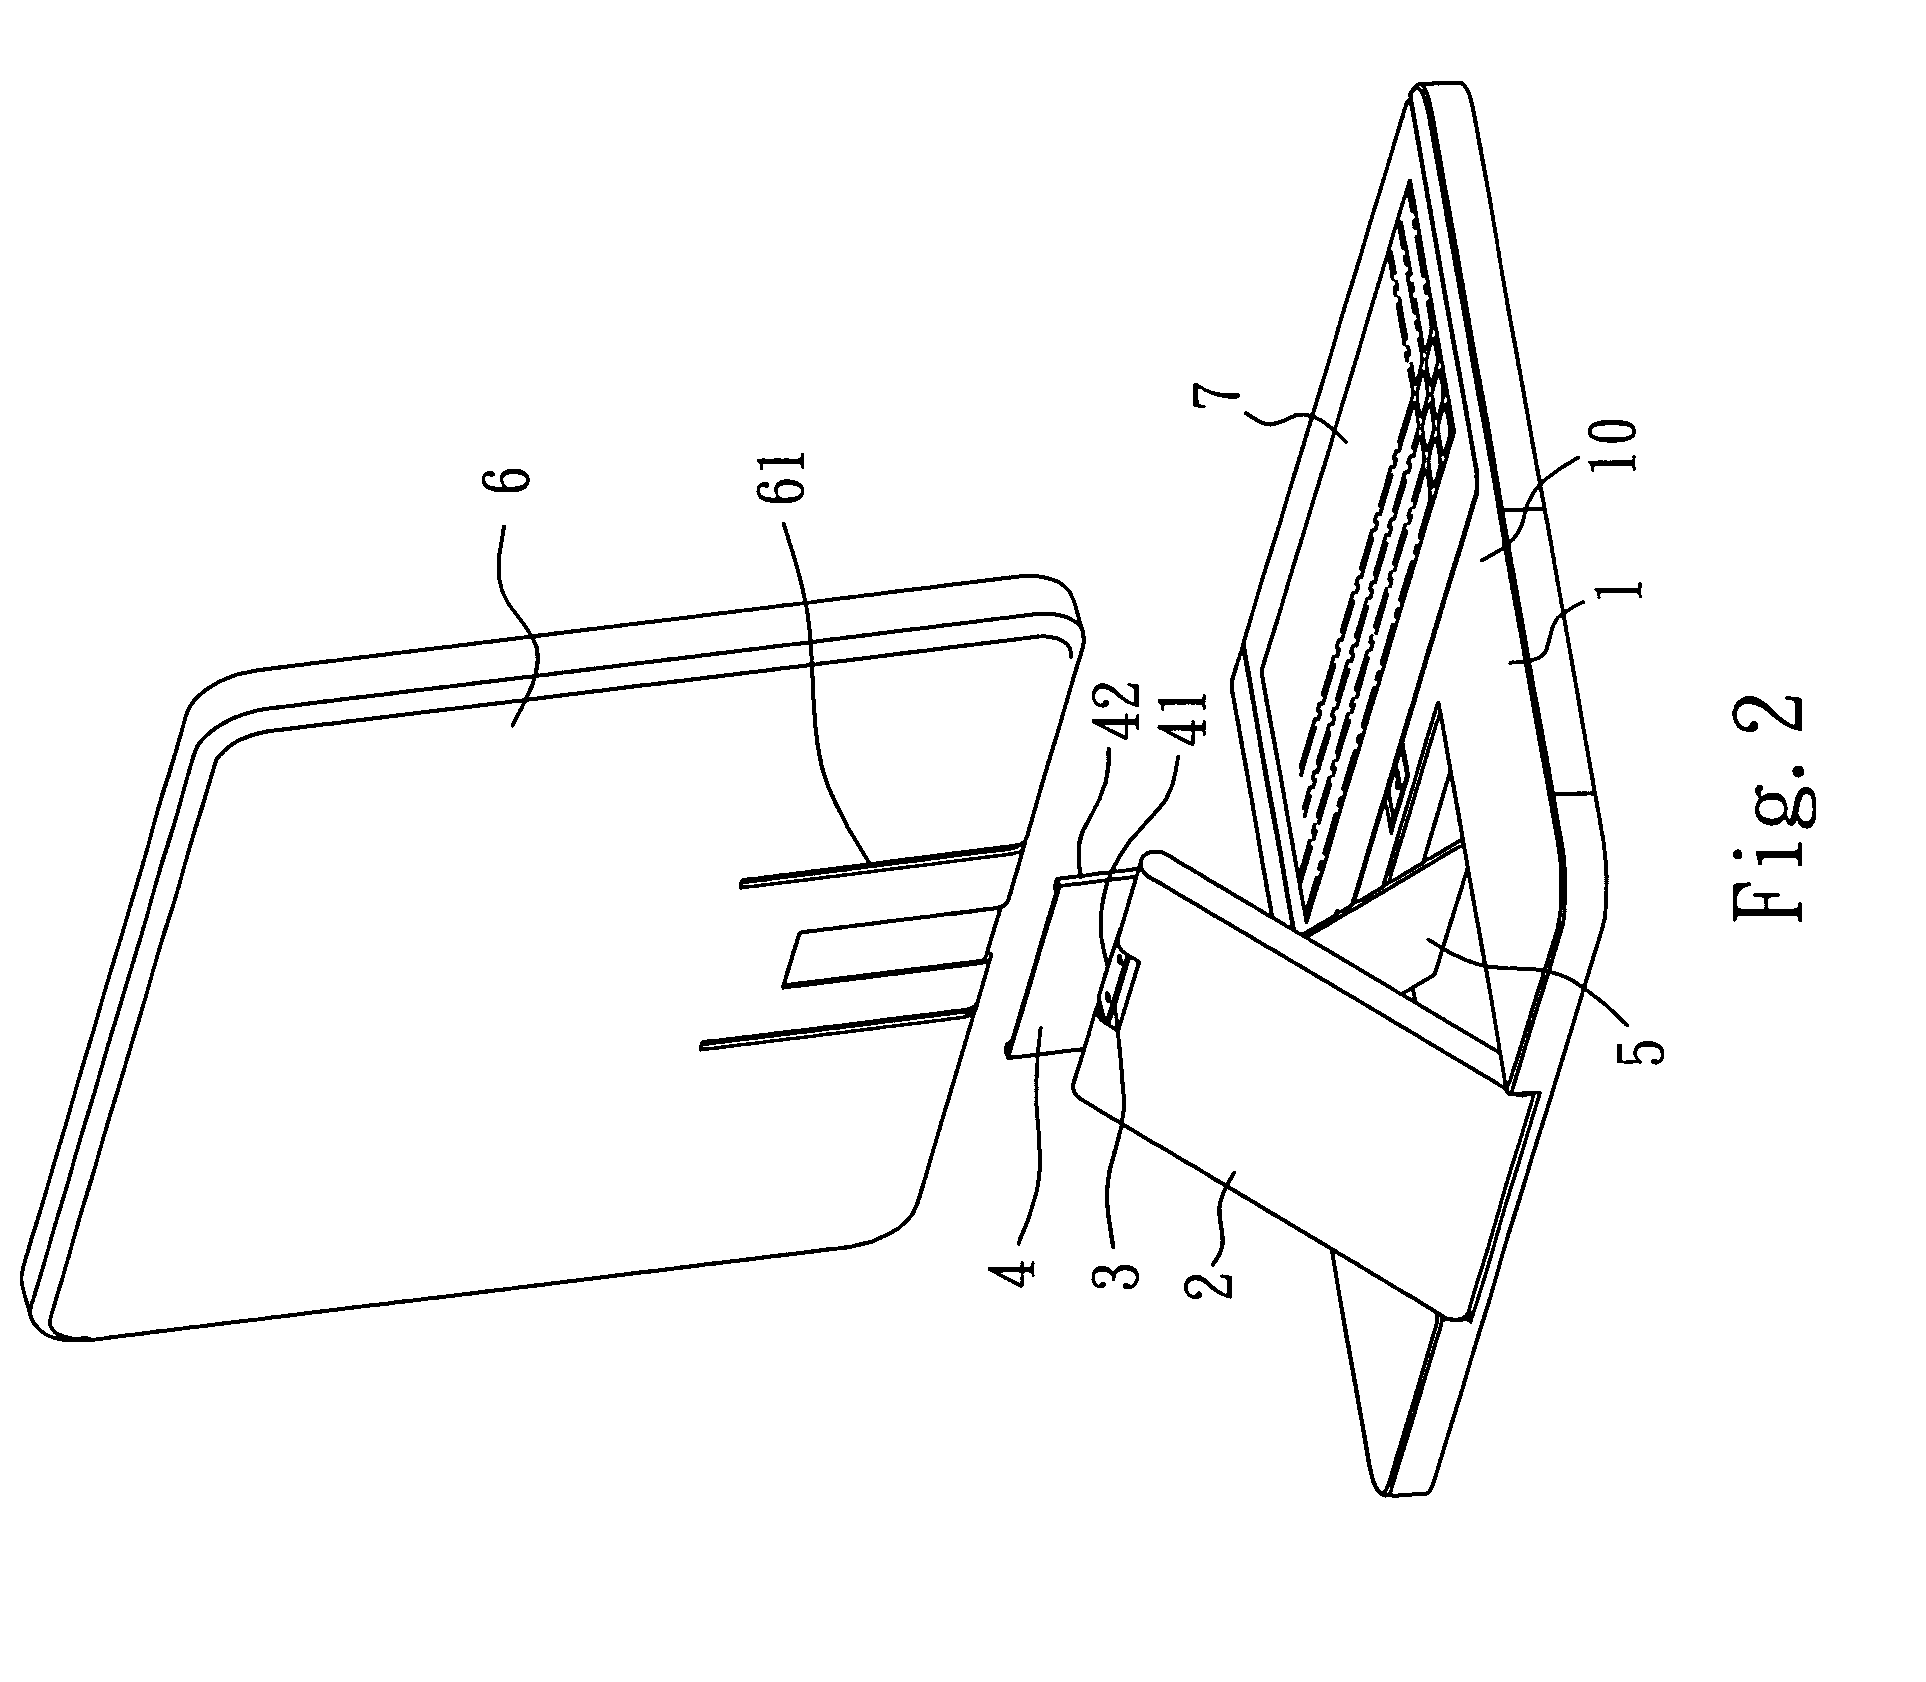 Portable computer support structure